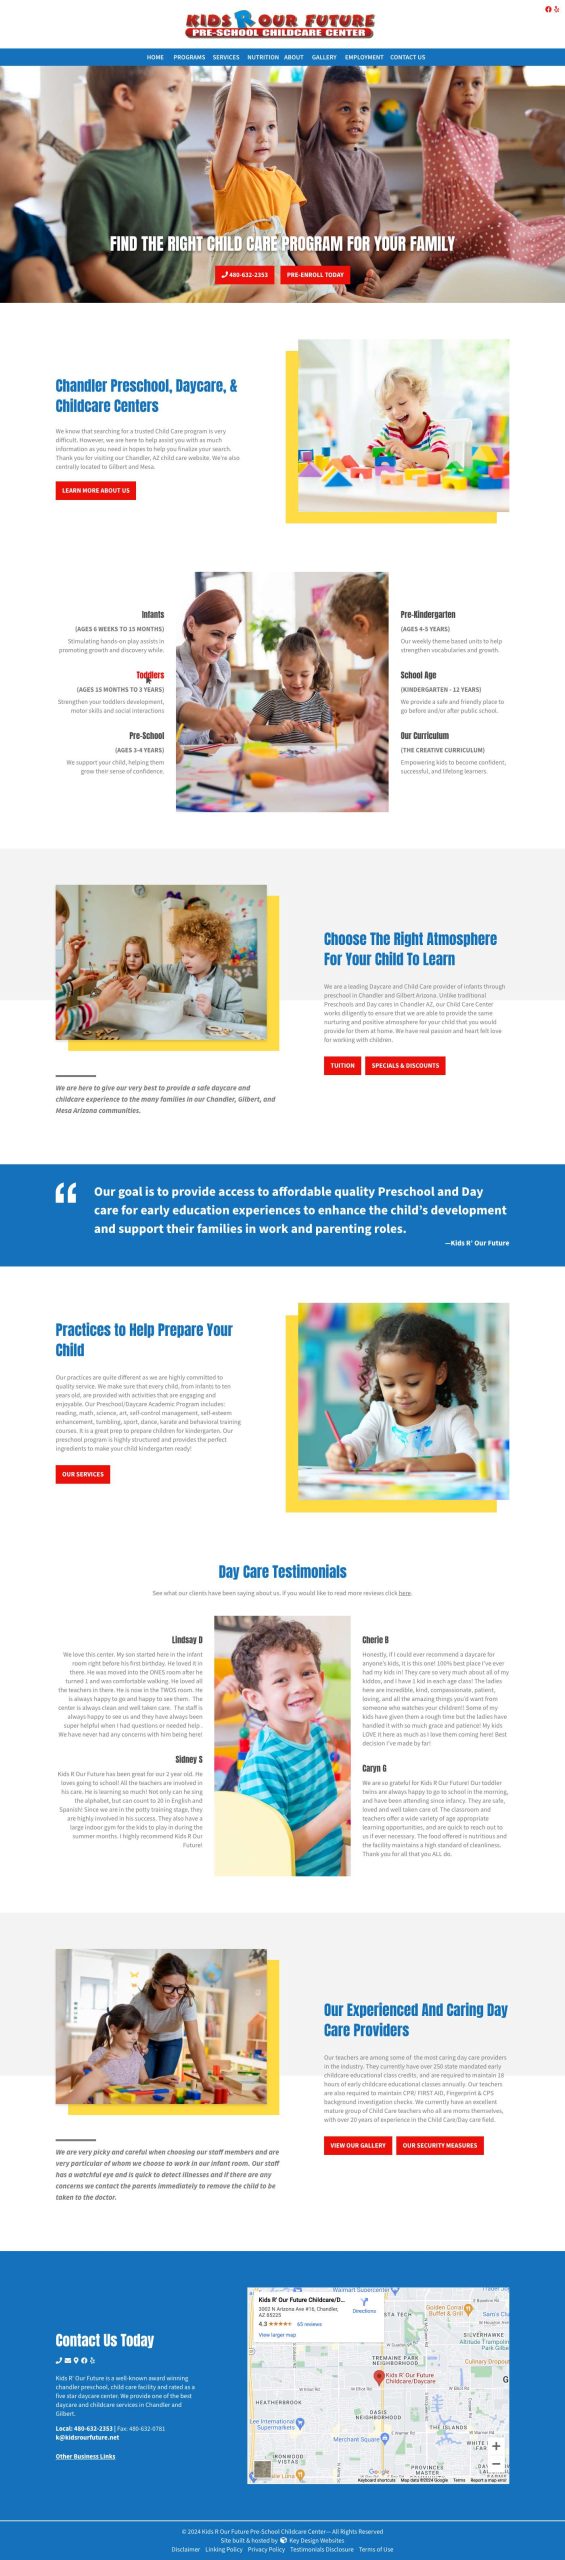 Screenshot of the Kids R Our Future Website Homepage